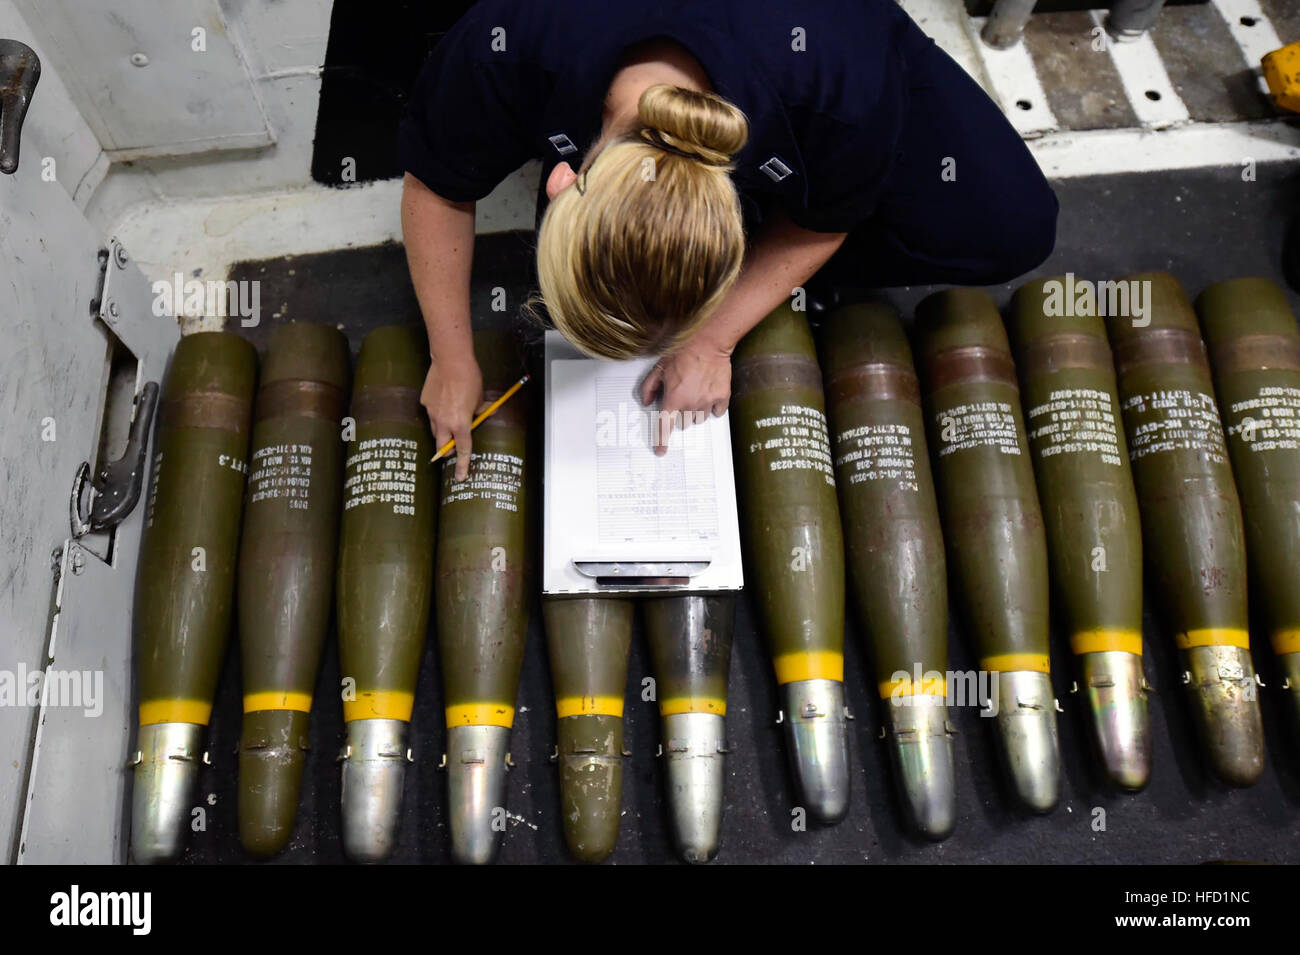 SOUDA BAY, Greece (Sept. 7, 2016) Lt. Carleigh Gregory from Herndon, Va., takes inventory of 5 inch ammunition aboard USS Ross (DDG 71) Sept. 7, 2016.  Ross, an Arleigh Burke-class guided-missile destroyer, forward-deployed to Rota, Spain, is conducting naval operations in the U.S. 6th Fleet Area of Operations in support of U.S. national security interests in Europe and Africa. (U.S. Navy photo by Mass Communication Specialist 1st Class Theron J. Godbold/Released160907-N-FP878-026 Join the conversation: http://www.navy.mil/viewGallery.asp http://www.facebook.com/USNavy http://www.twitter.com/U Stock Photo